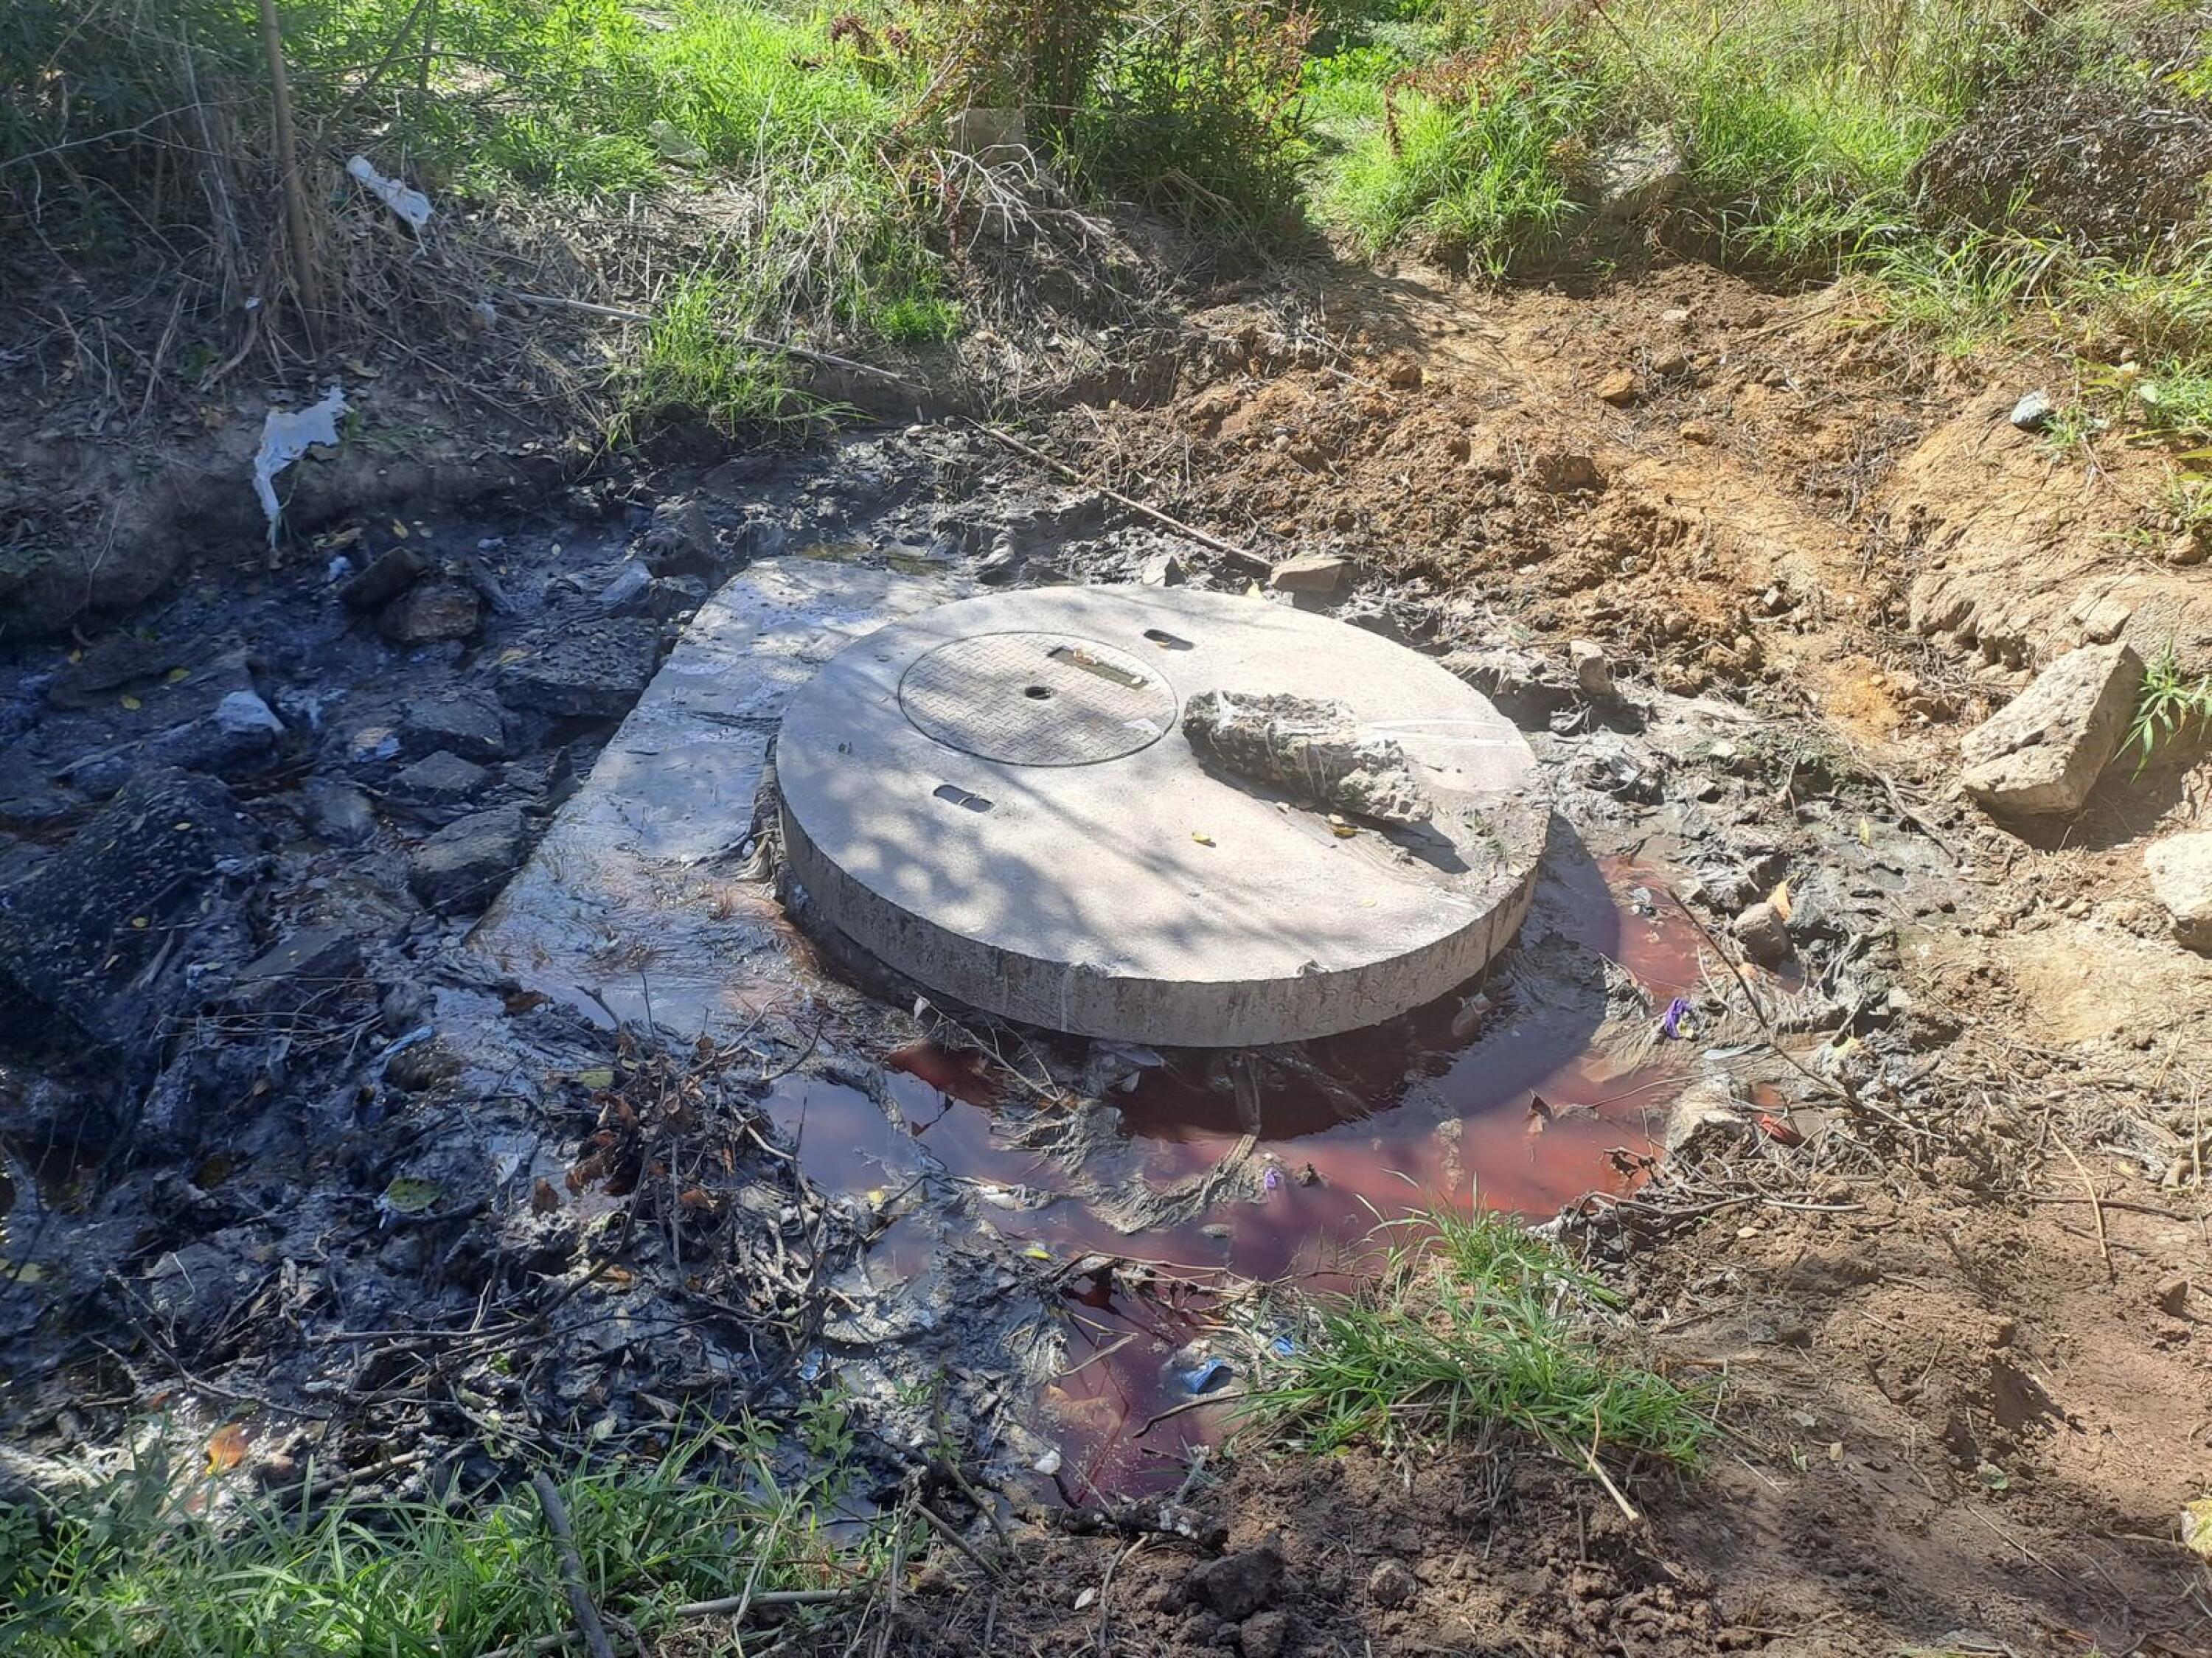 An image of sewage flowing from a manhole near the Vaal River.